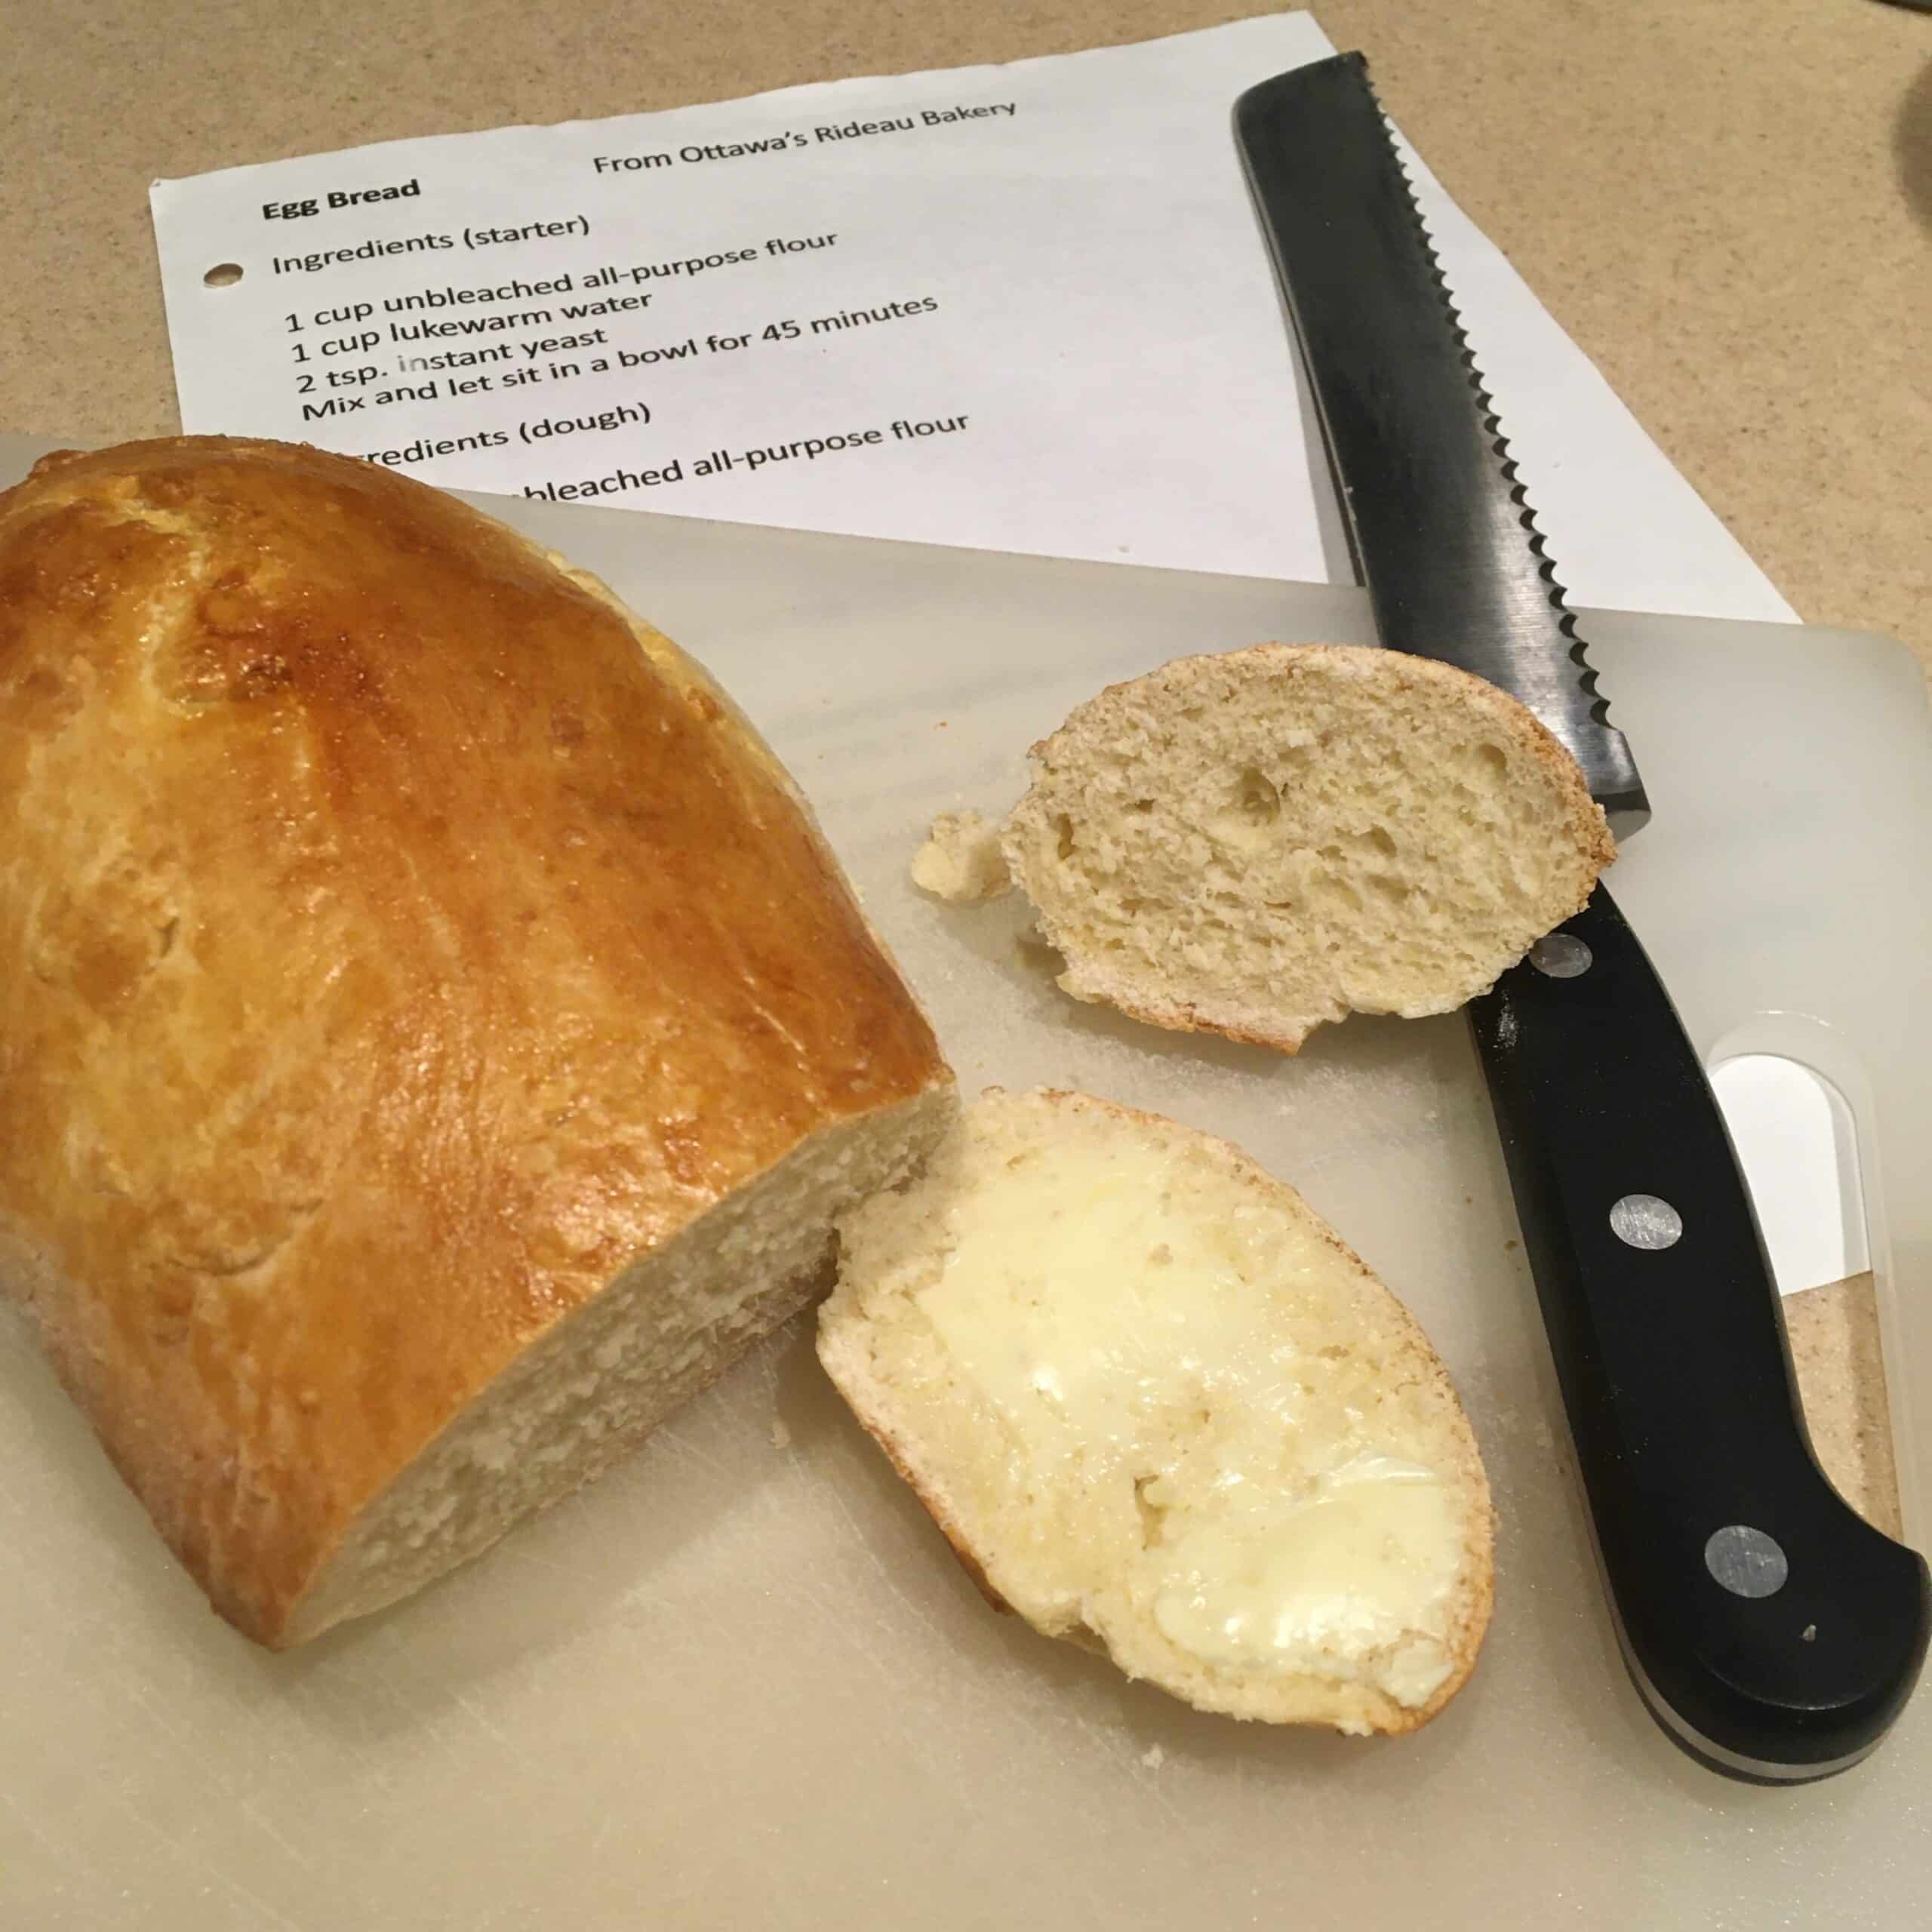 Bread loaf with buttered slice and bread knife.